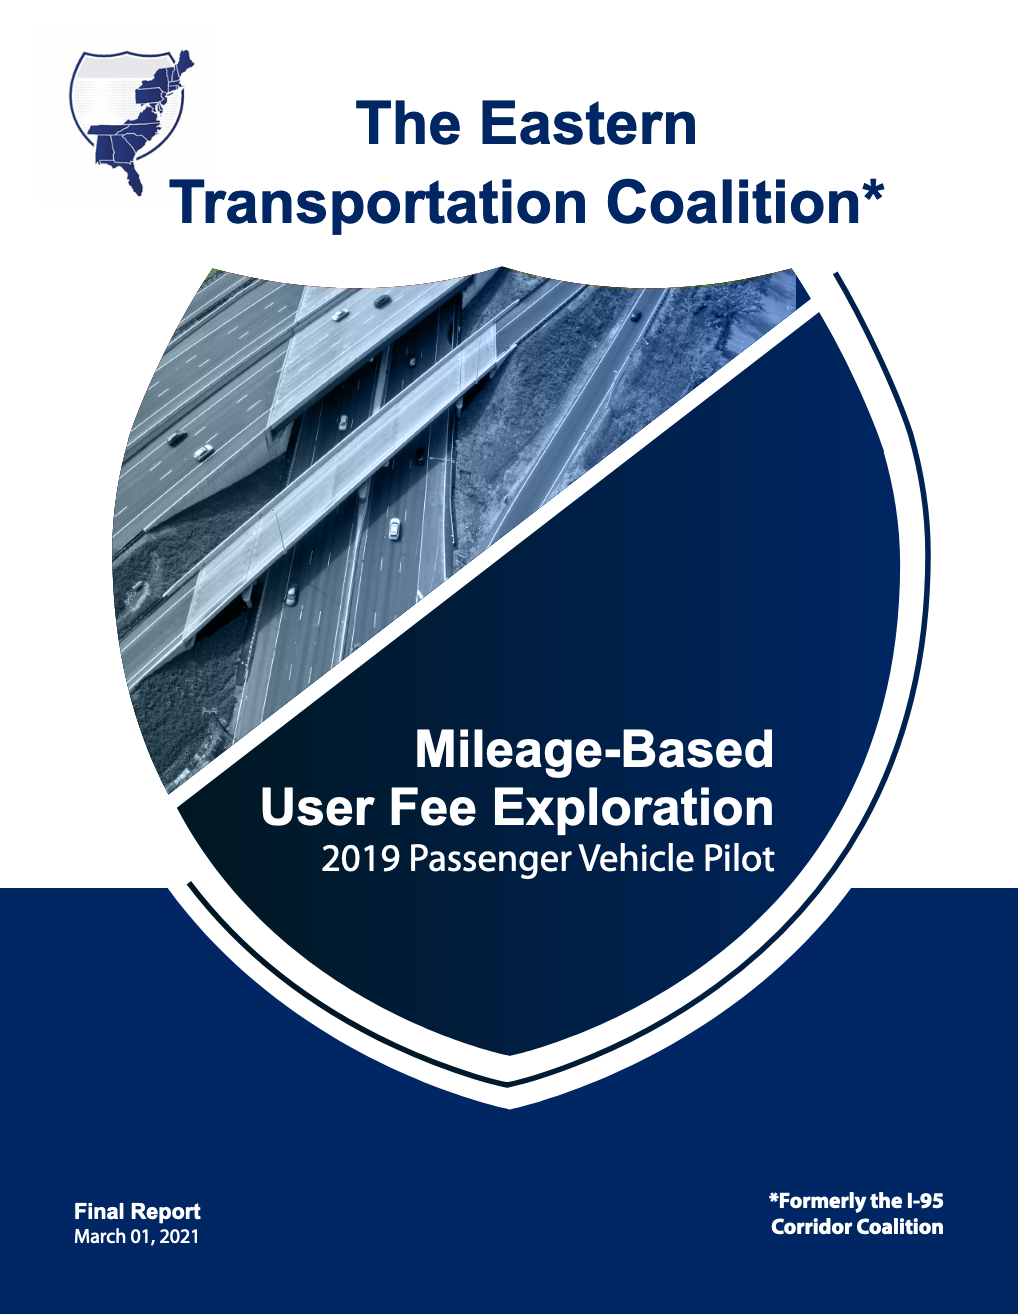 Document cover, in white and blue, reading The Eastern Transortation Coalition (Formerly the I-95 Corridor Coalition) Mileage-Based User Fee Exploration 2019 Passenger Vehicle Pilot, Final Report, March 01, 2021